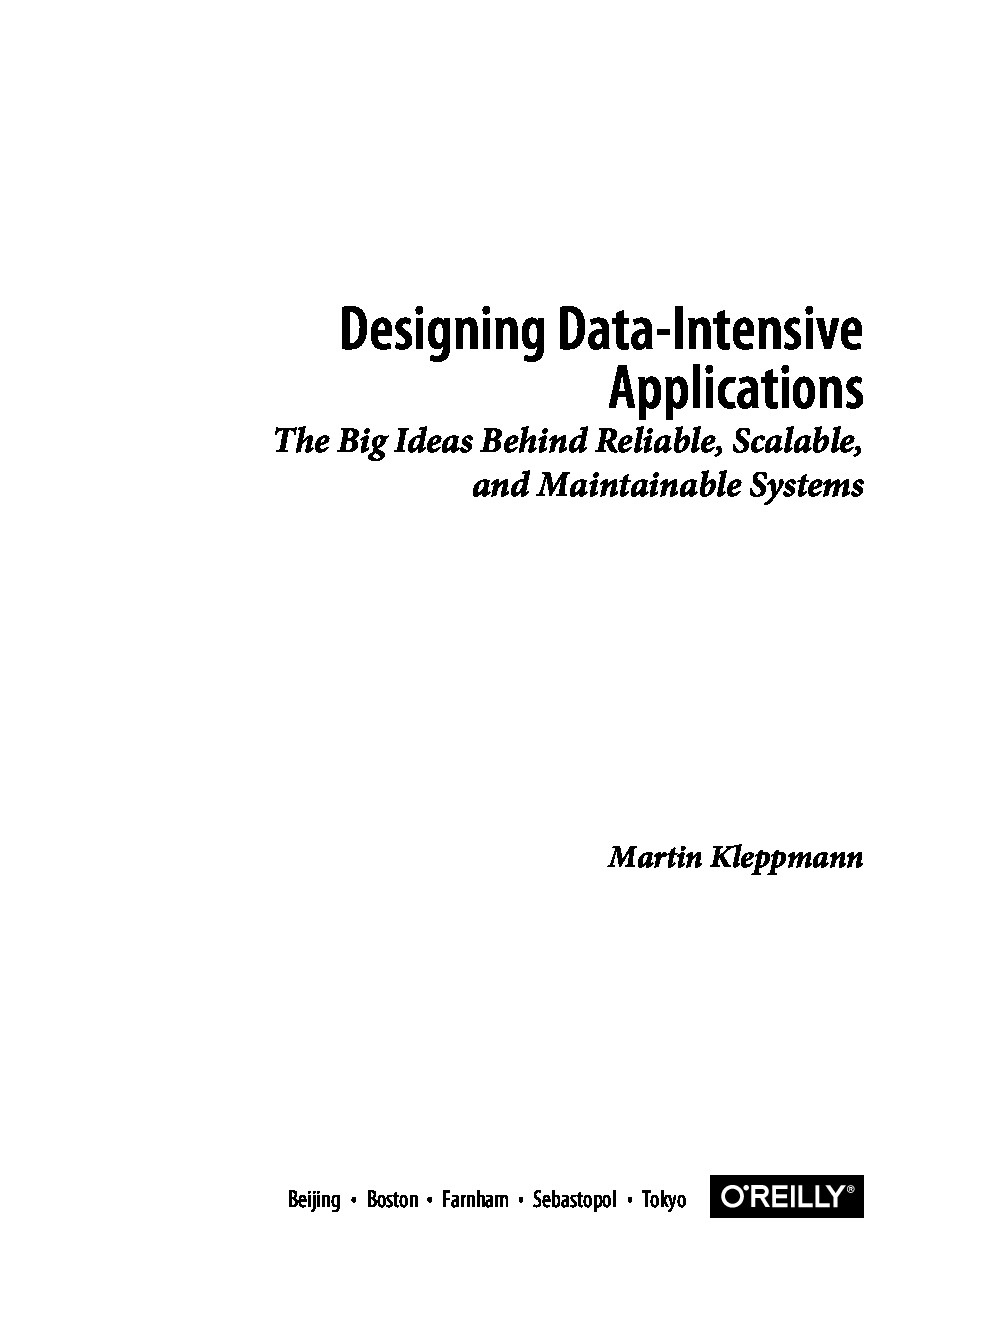 Designing Data-Intensive Applications – The Big Ideas Behind Reliable, Scalable and Maintainable Systems